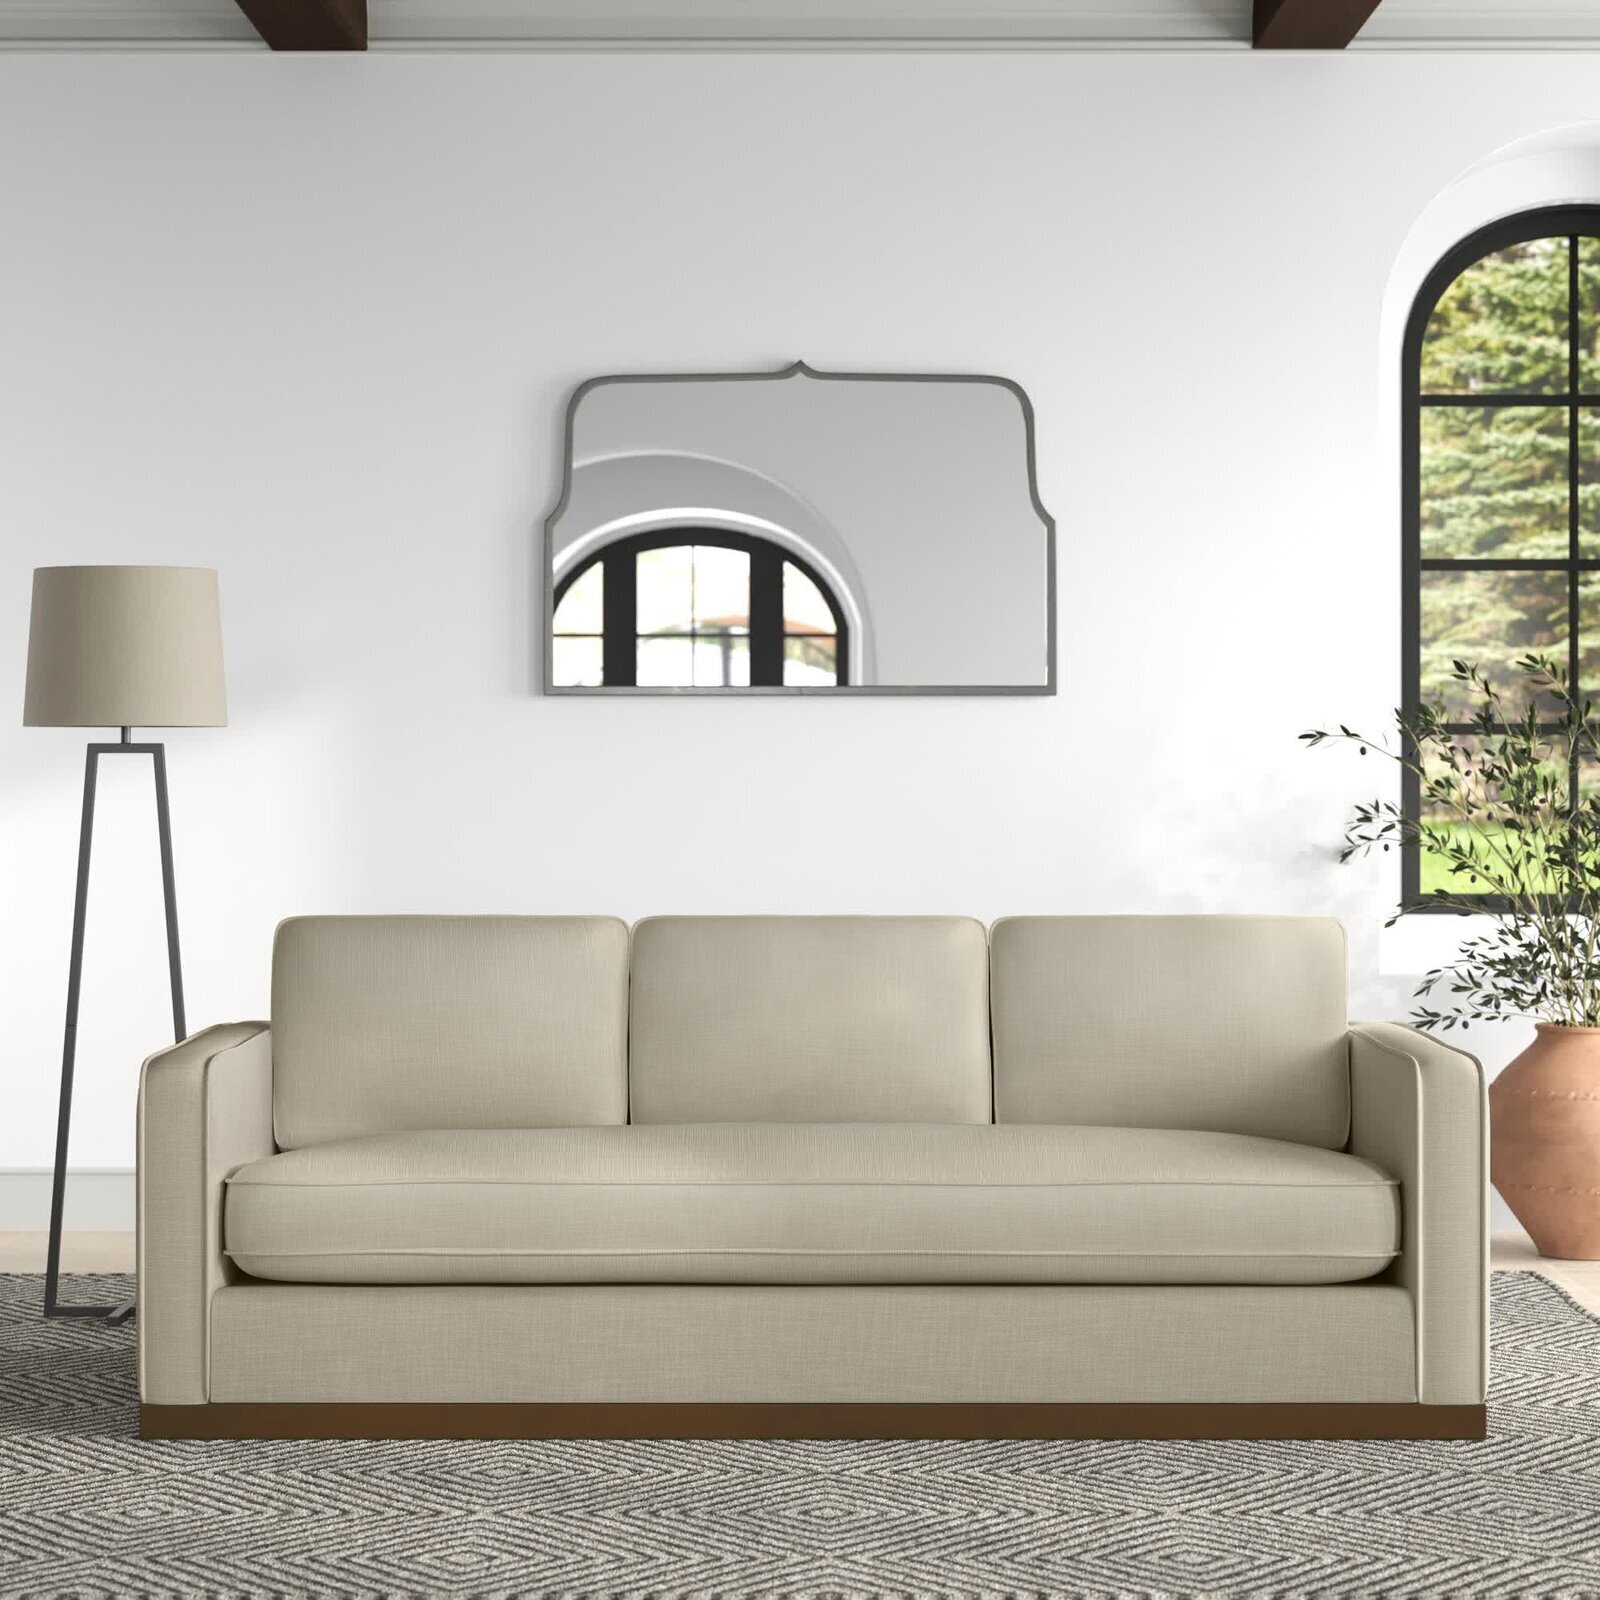 Oatmeal Colored Standard Sofa With Solid Wood Frame 